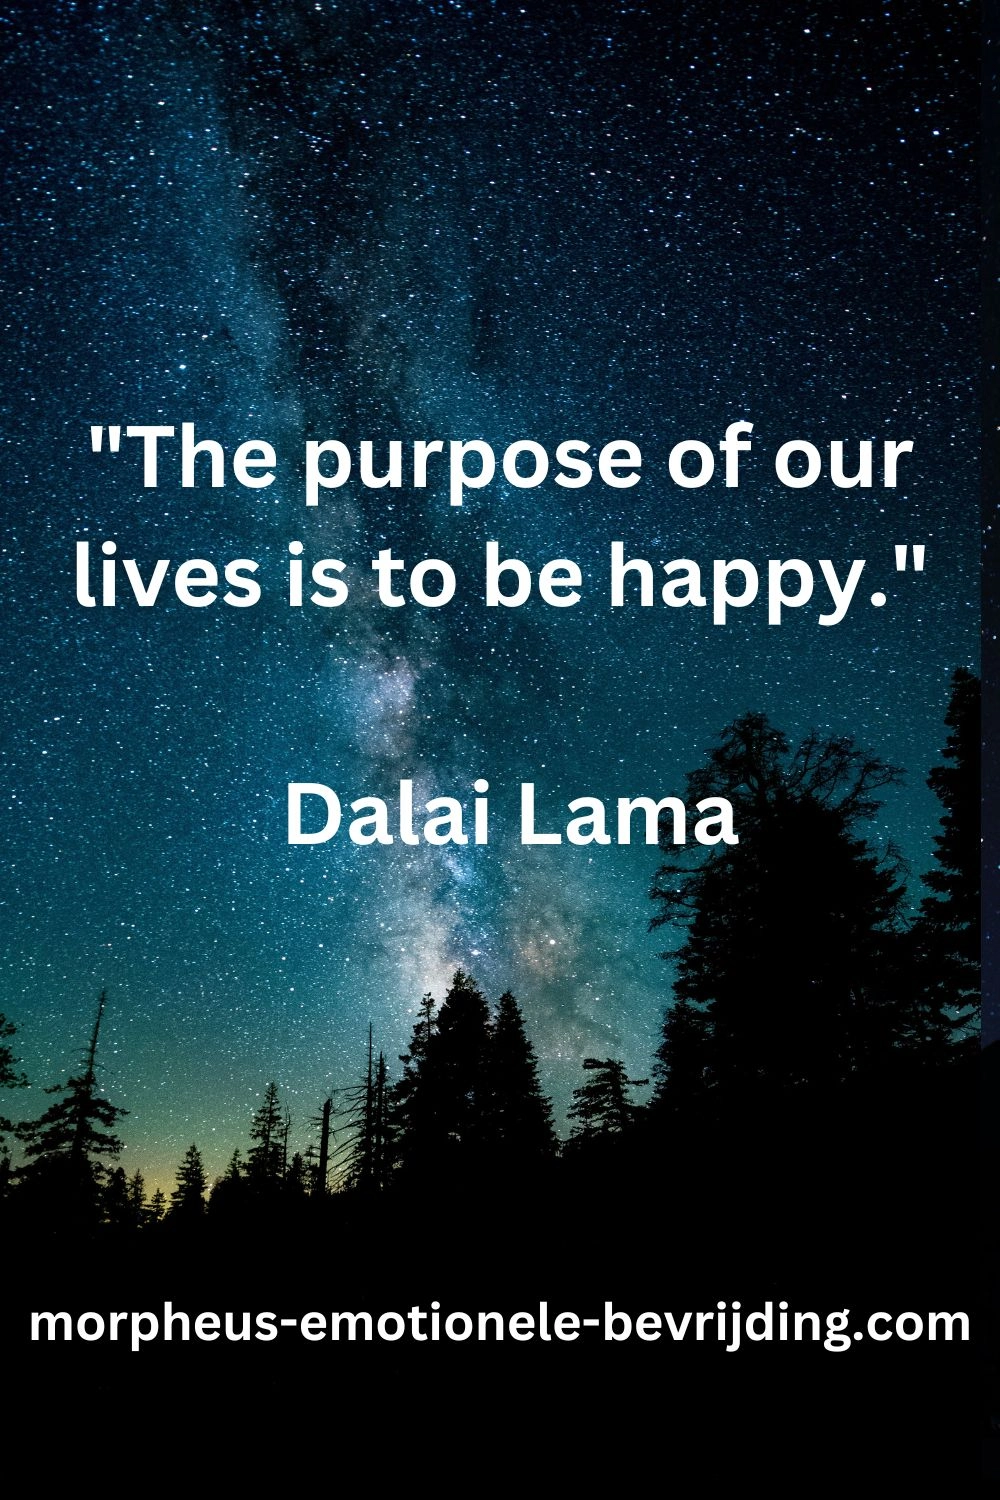 quotes over het leven - The purpose of our lives is to be happy - Dalai Lama